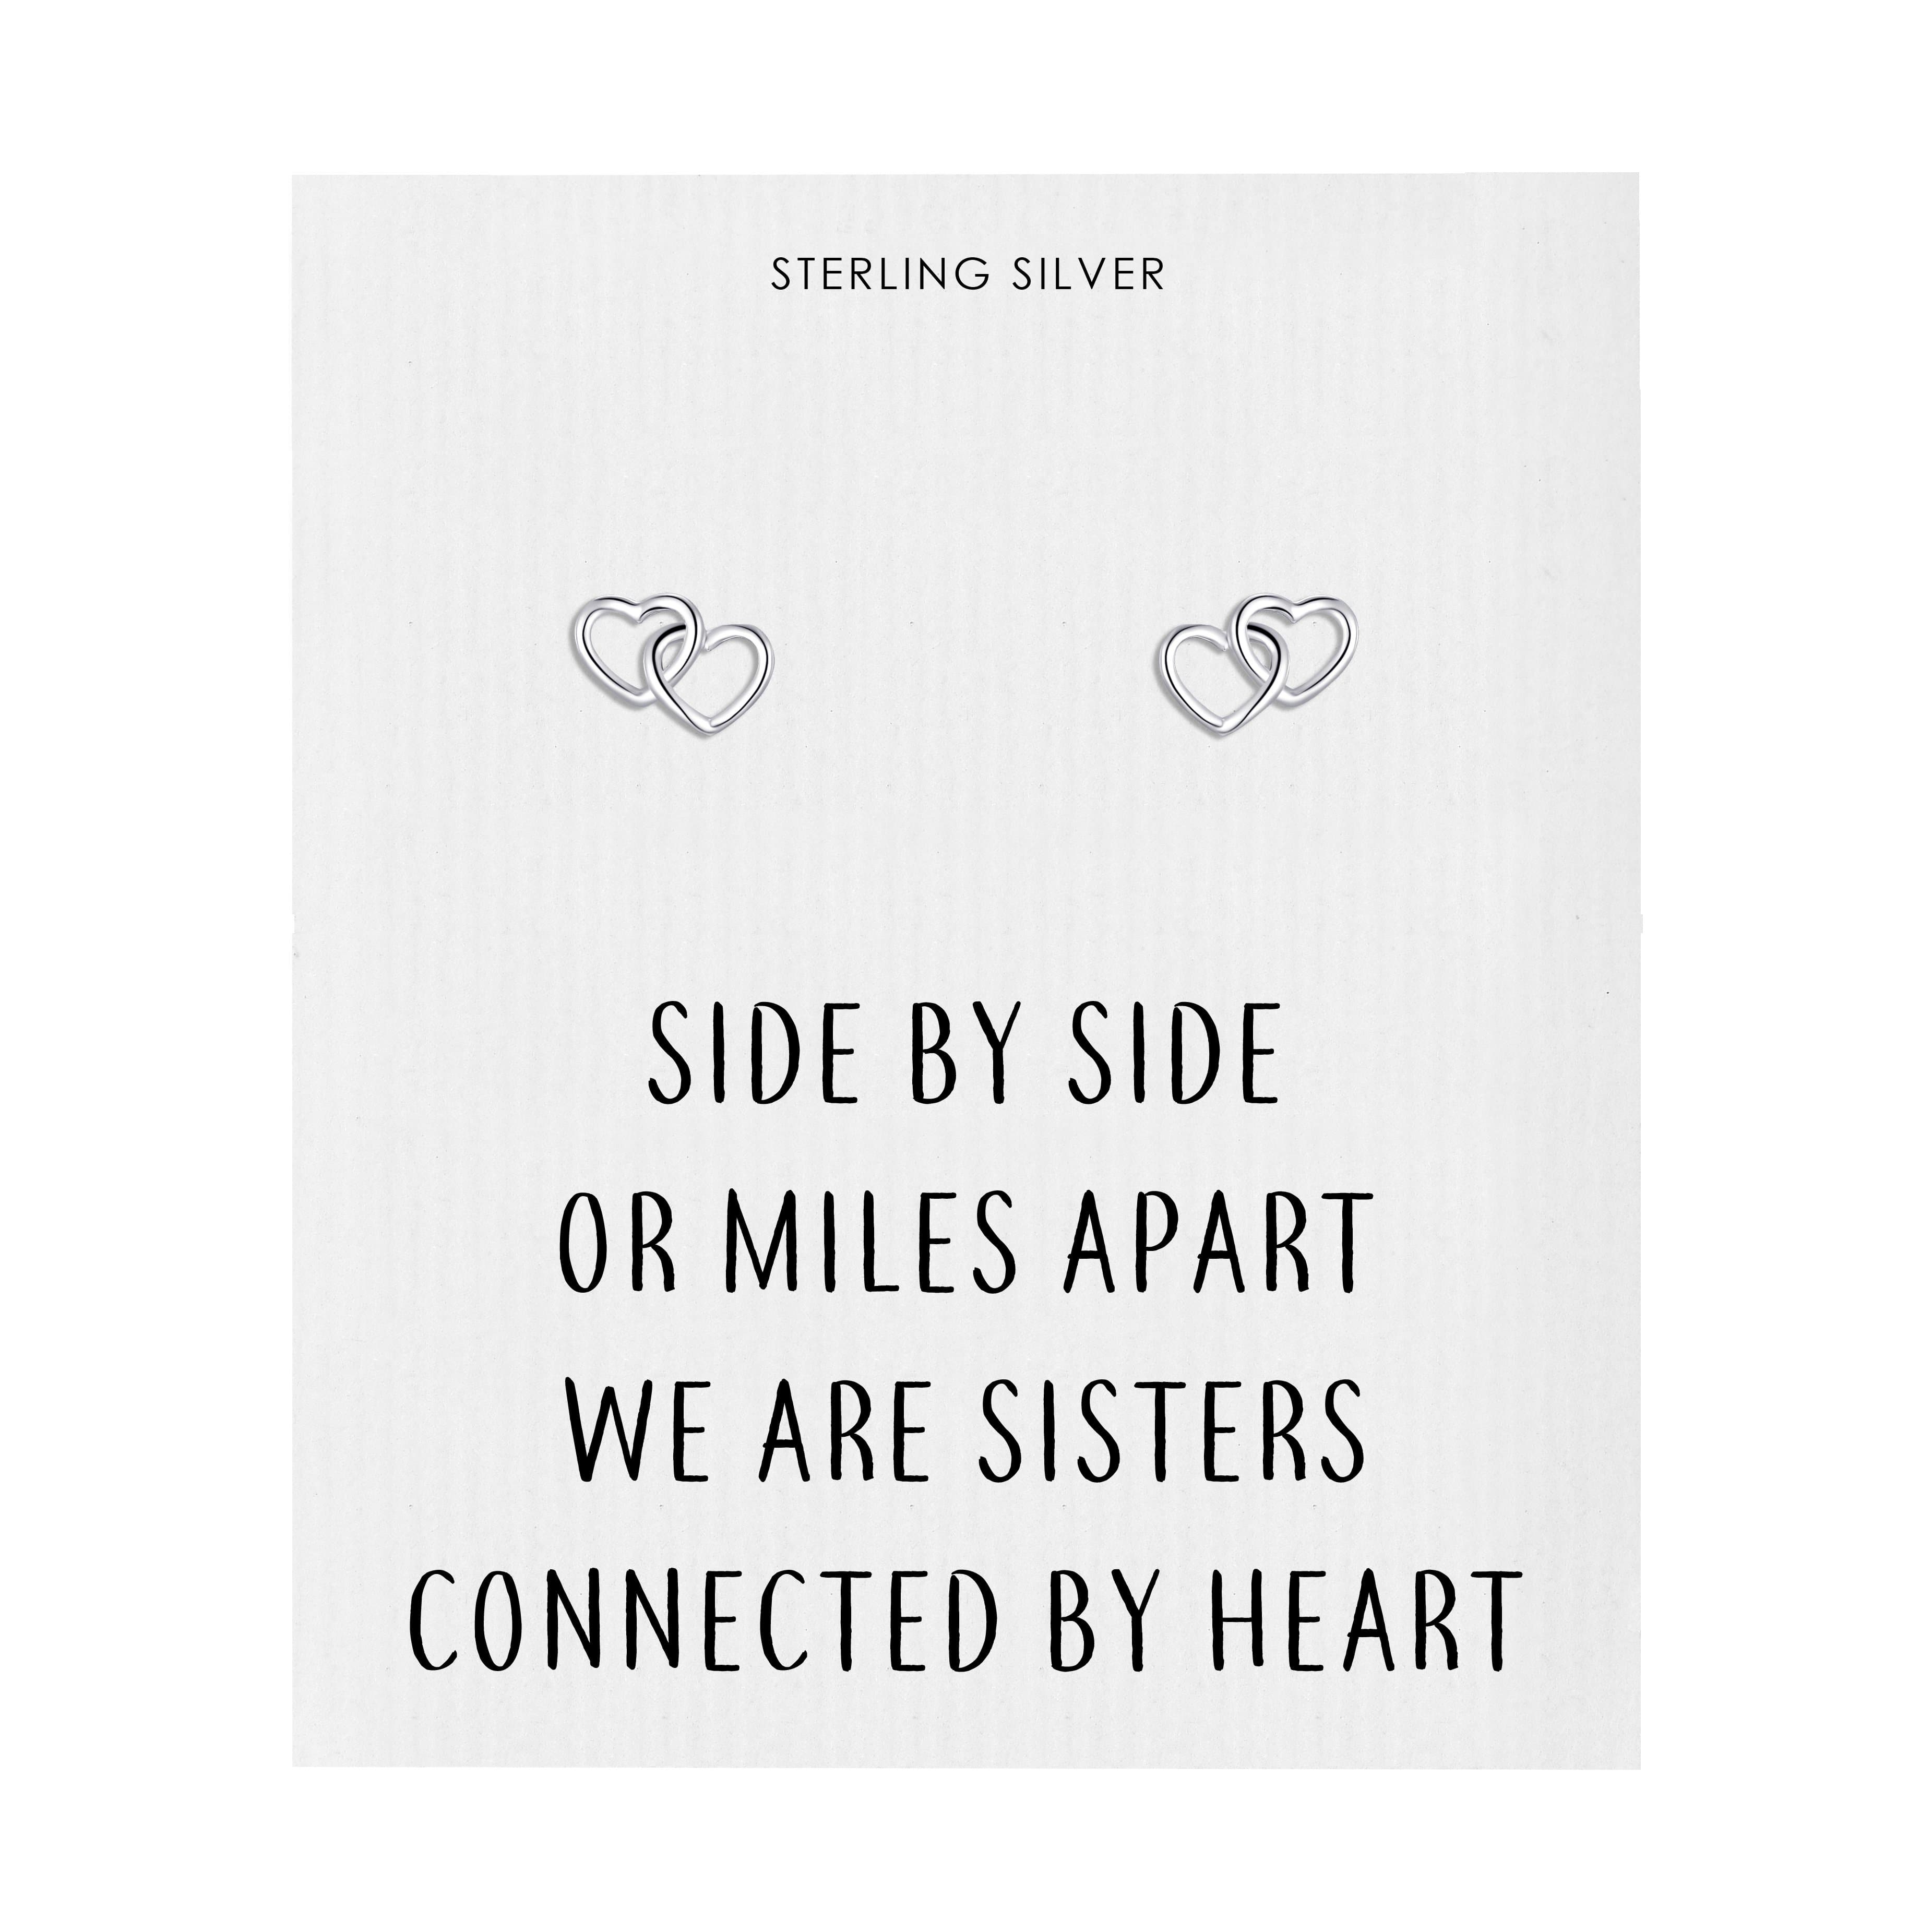 Sterling Silver Sister Heart Link Earrings with Quote Card by Philip Jones Jewellery